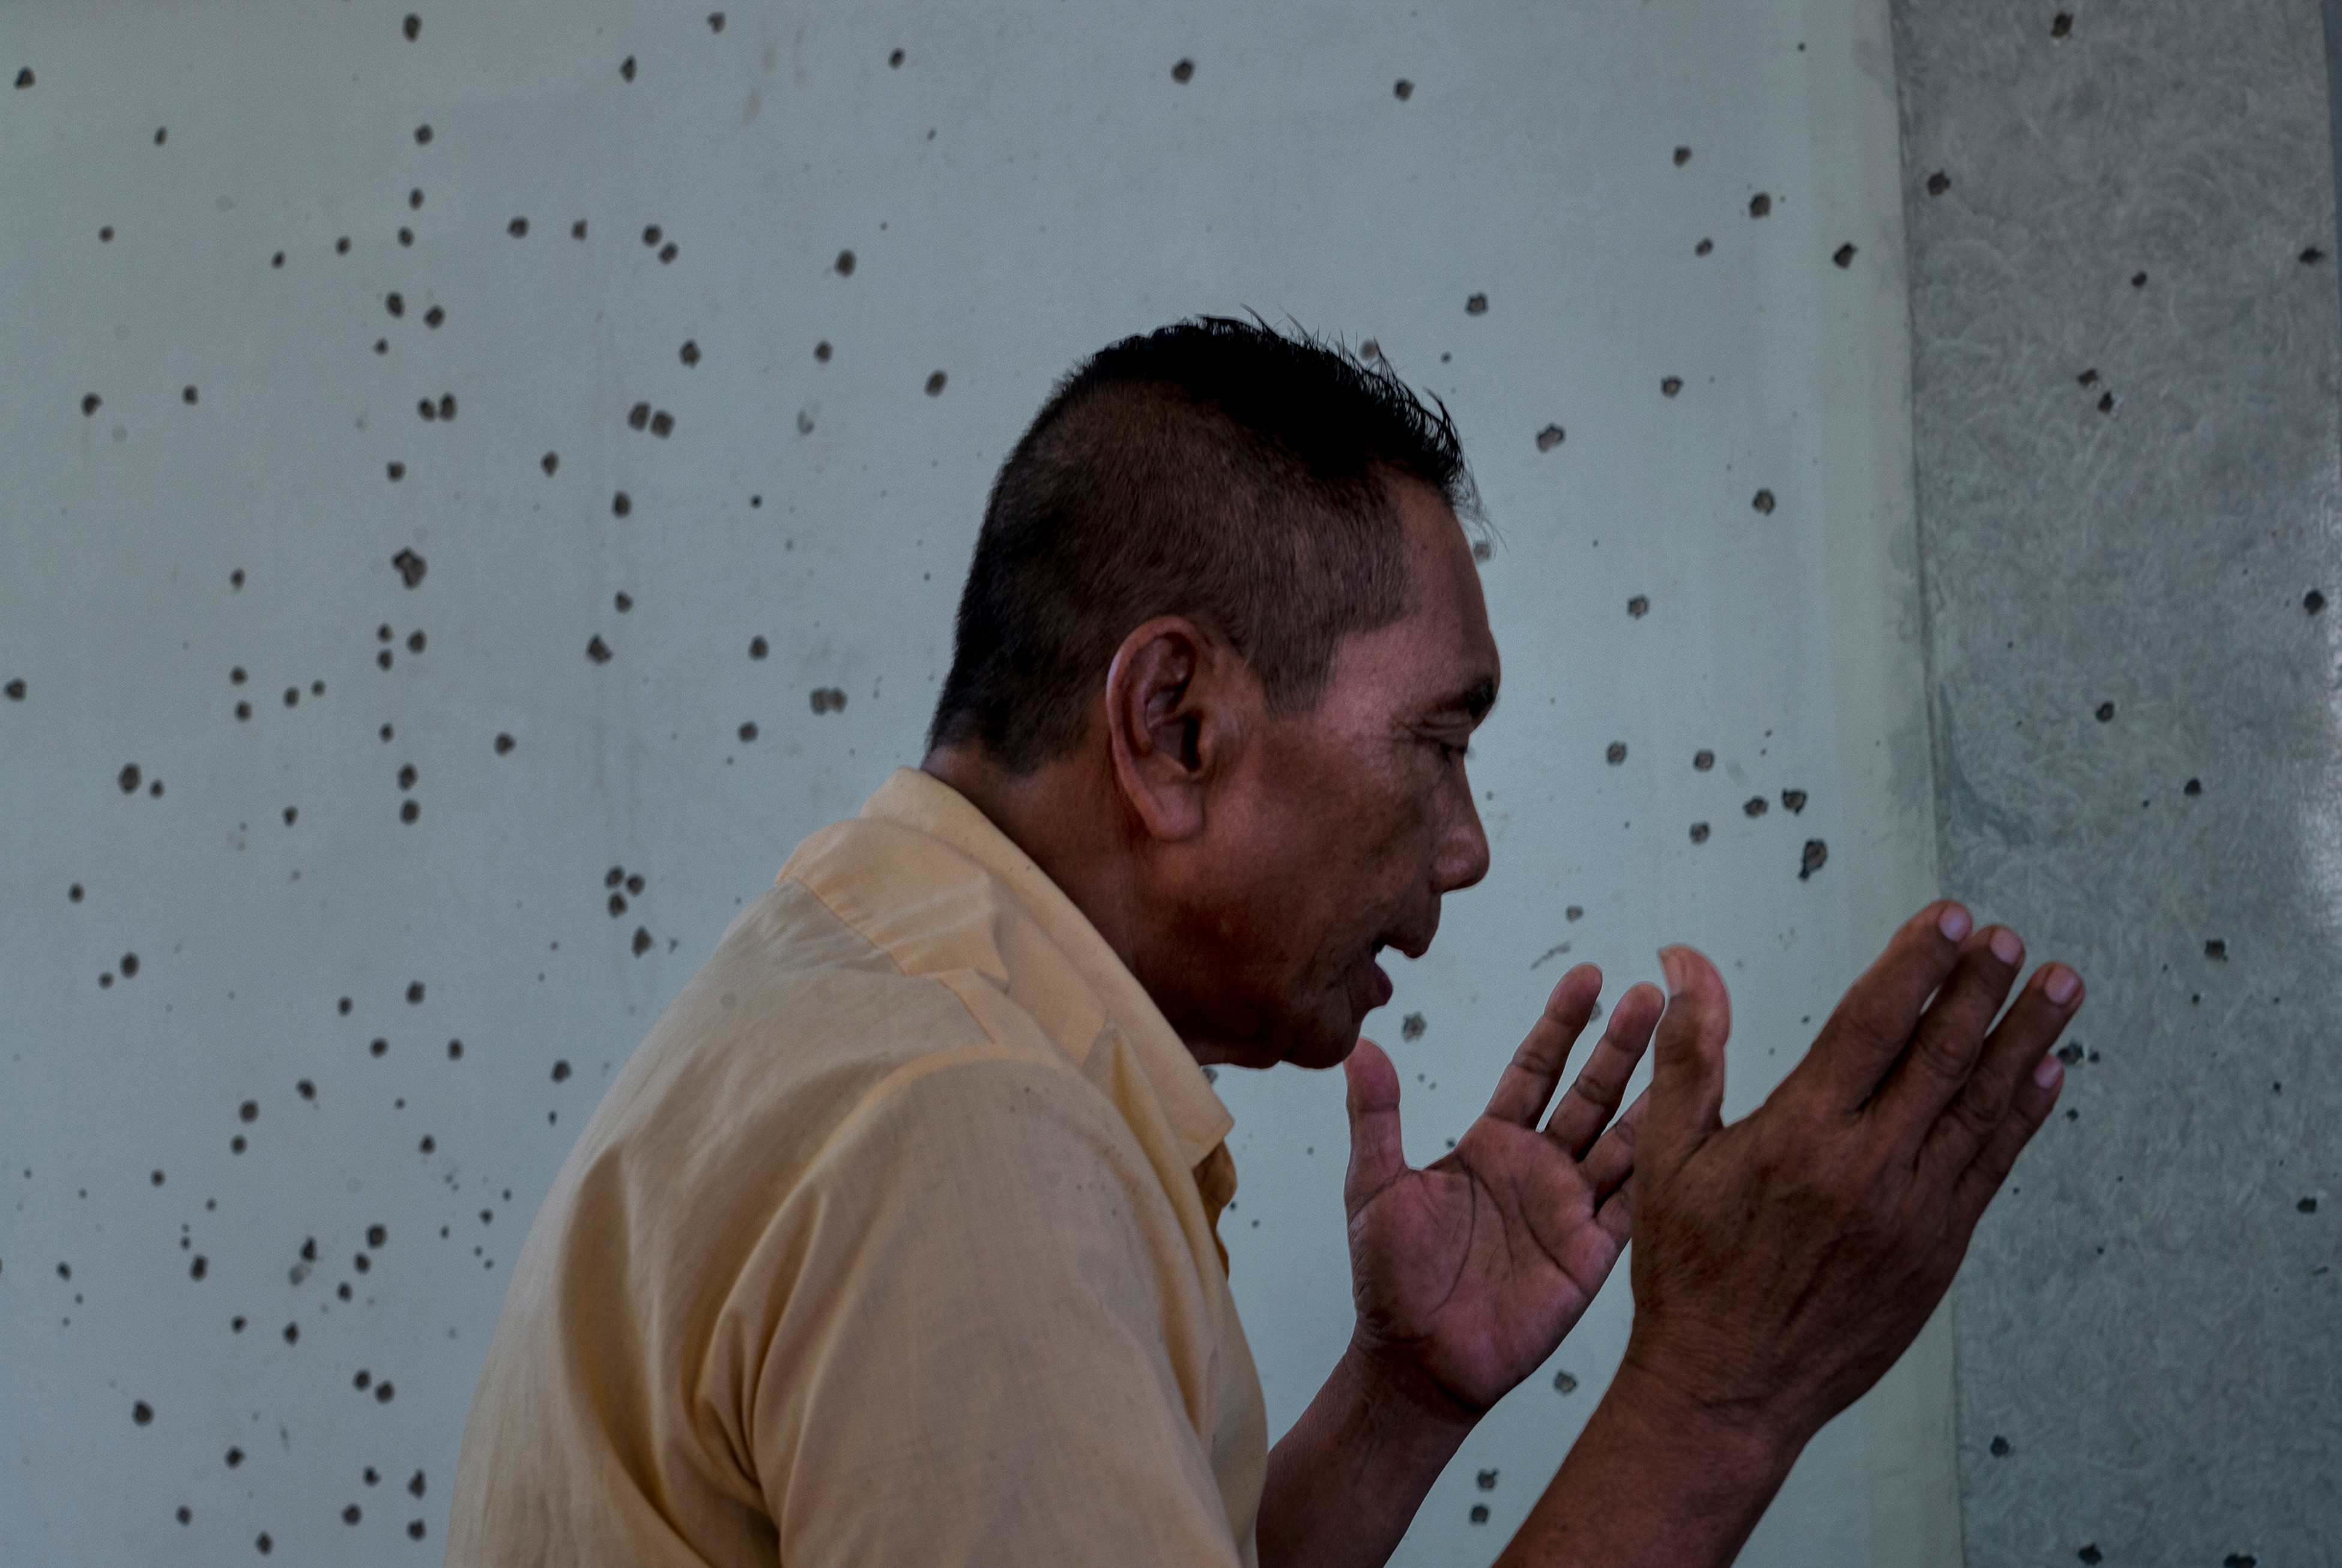 Laurel Julsali prays inside a mosque that has been hit with grenades, in Talon-Talon, Philippines.